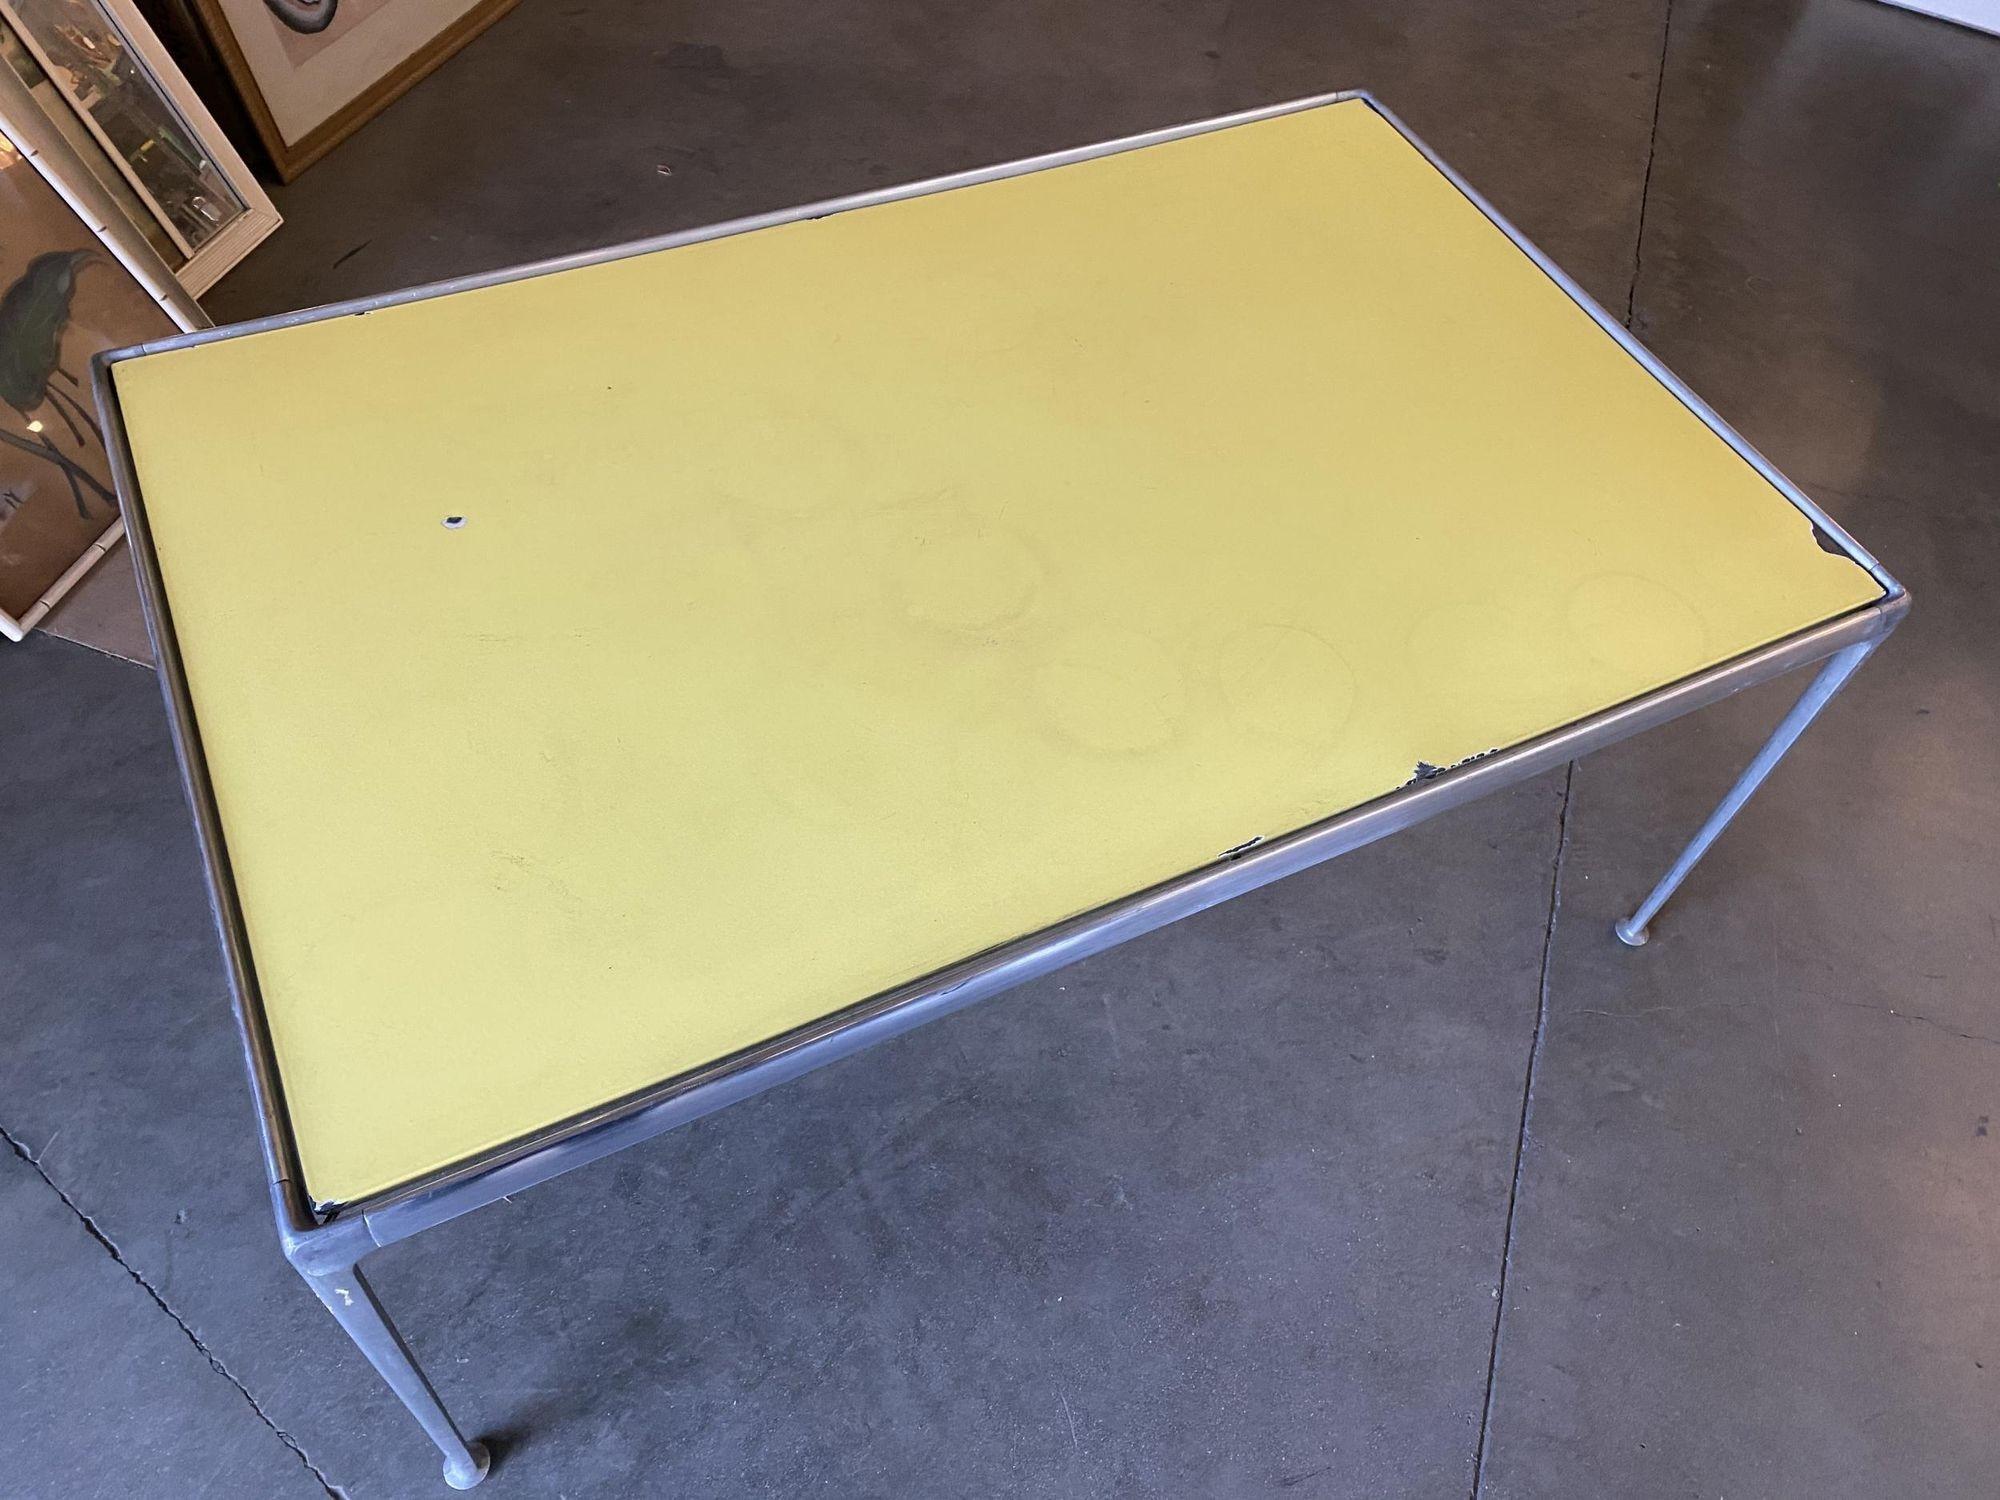 Rare Aluminum Midcentury Dining Table by Richard Shultz, circa 1966 In Excellent Condition For Sale In Van Nuys, CA